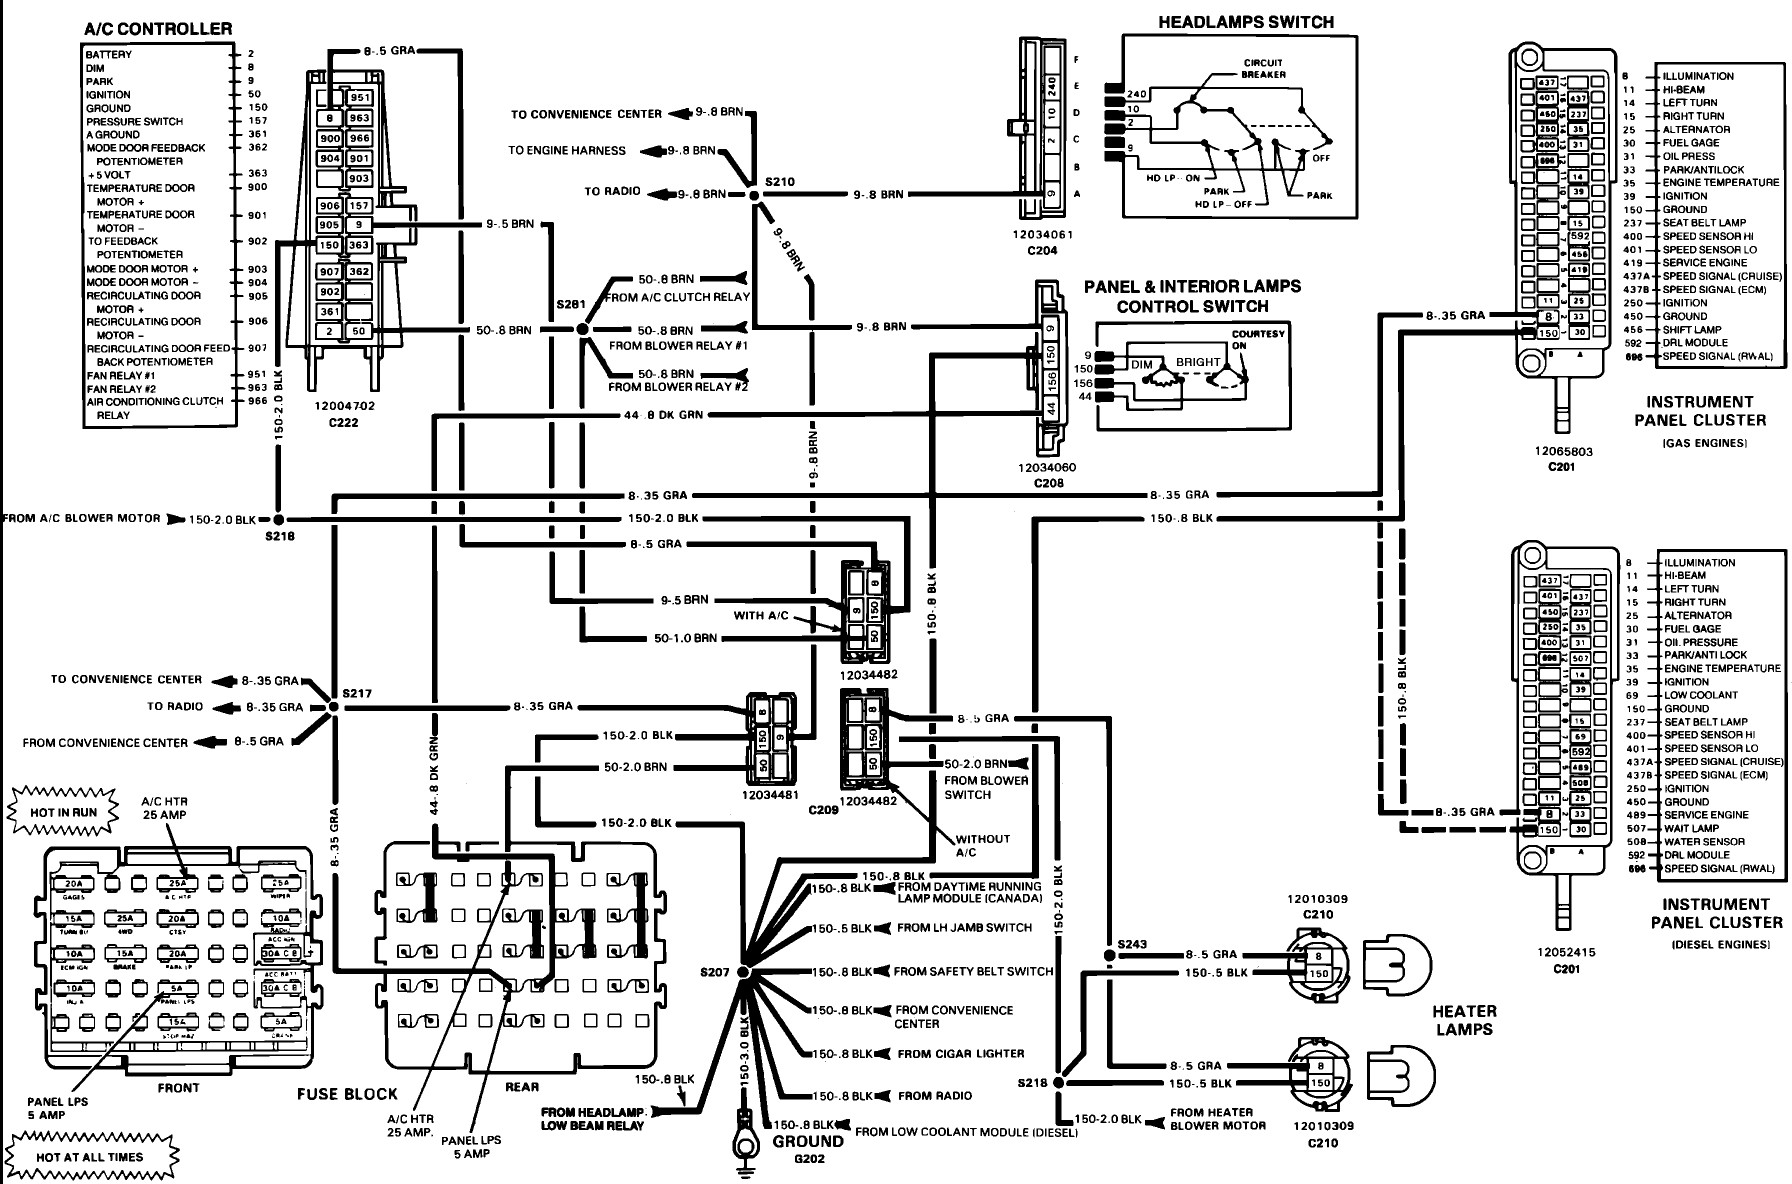 Wiring Diagram for 350 Chevy Engine 1979 Chevy Starter Wiring Of Wiring Diagram for 350 Chevy Engine